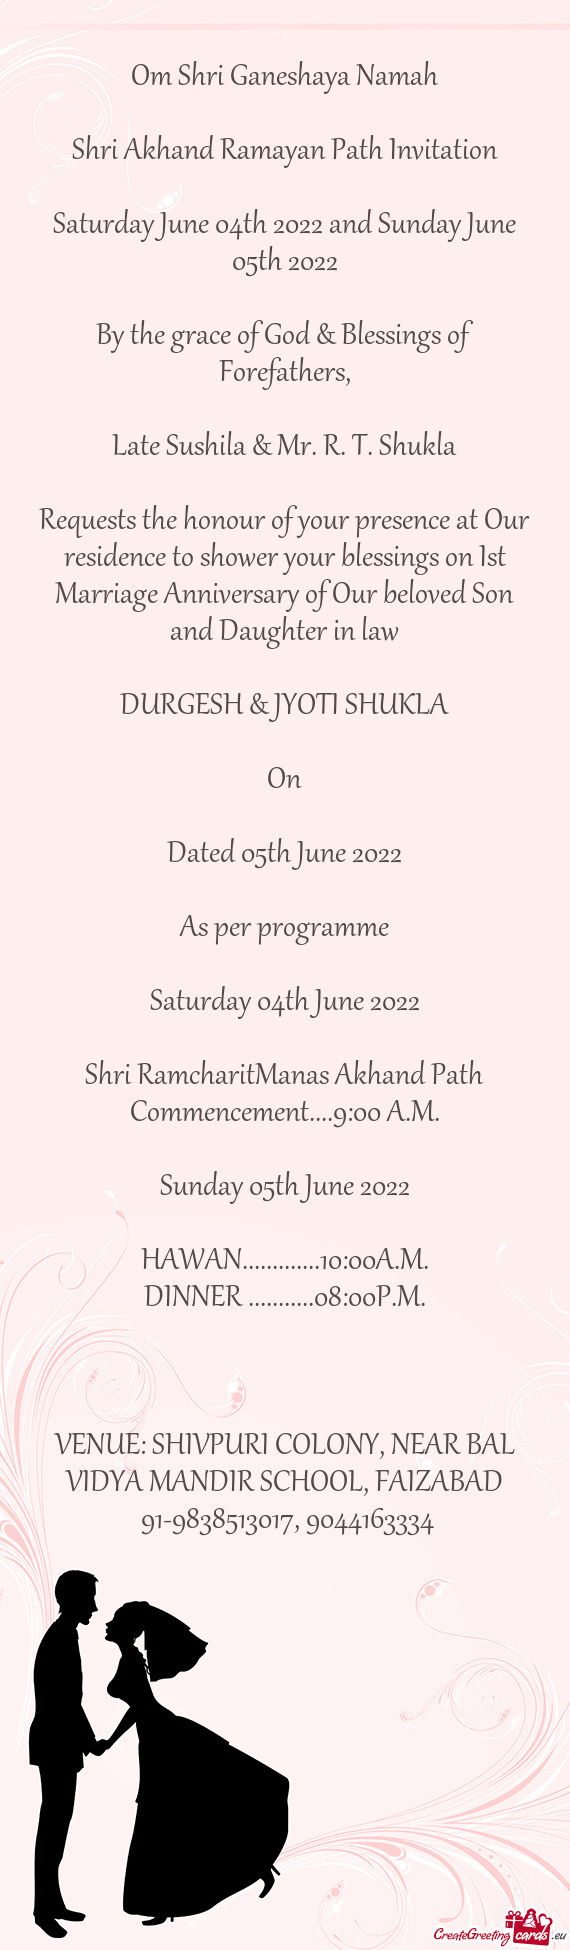 Saturday June 04th 2022 and Sunday June 05th 2022